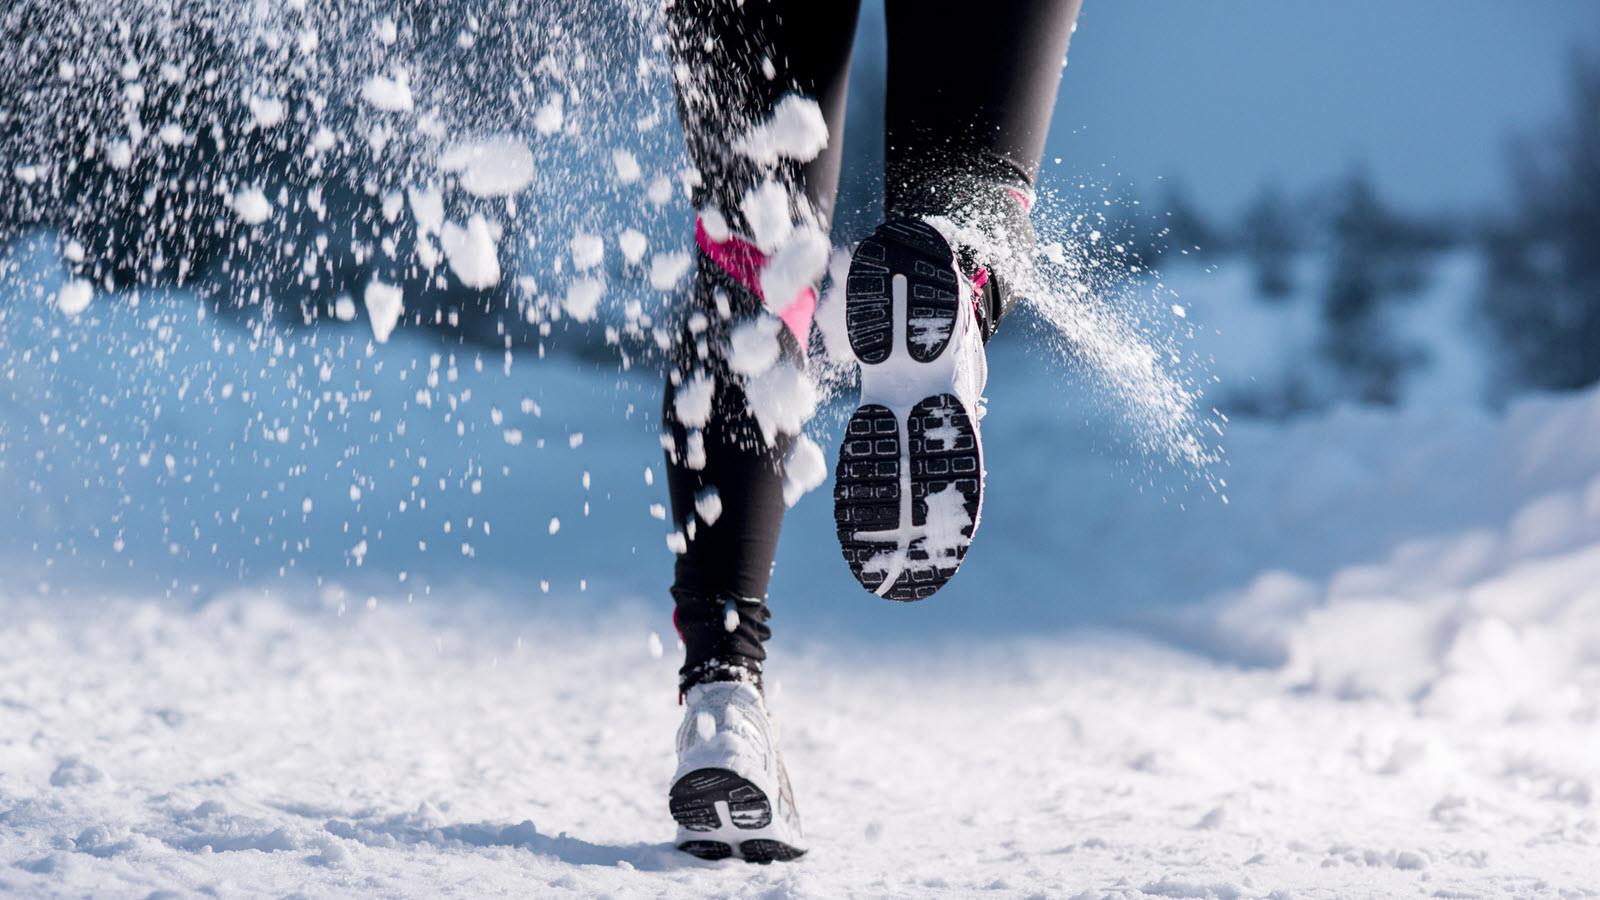 A runner's sneakers in the snow